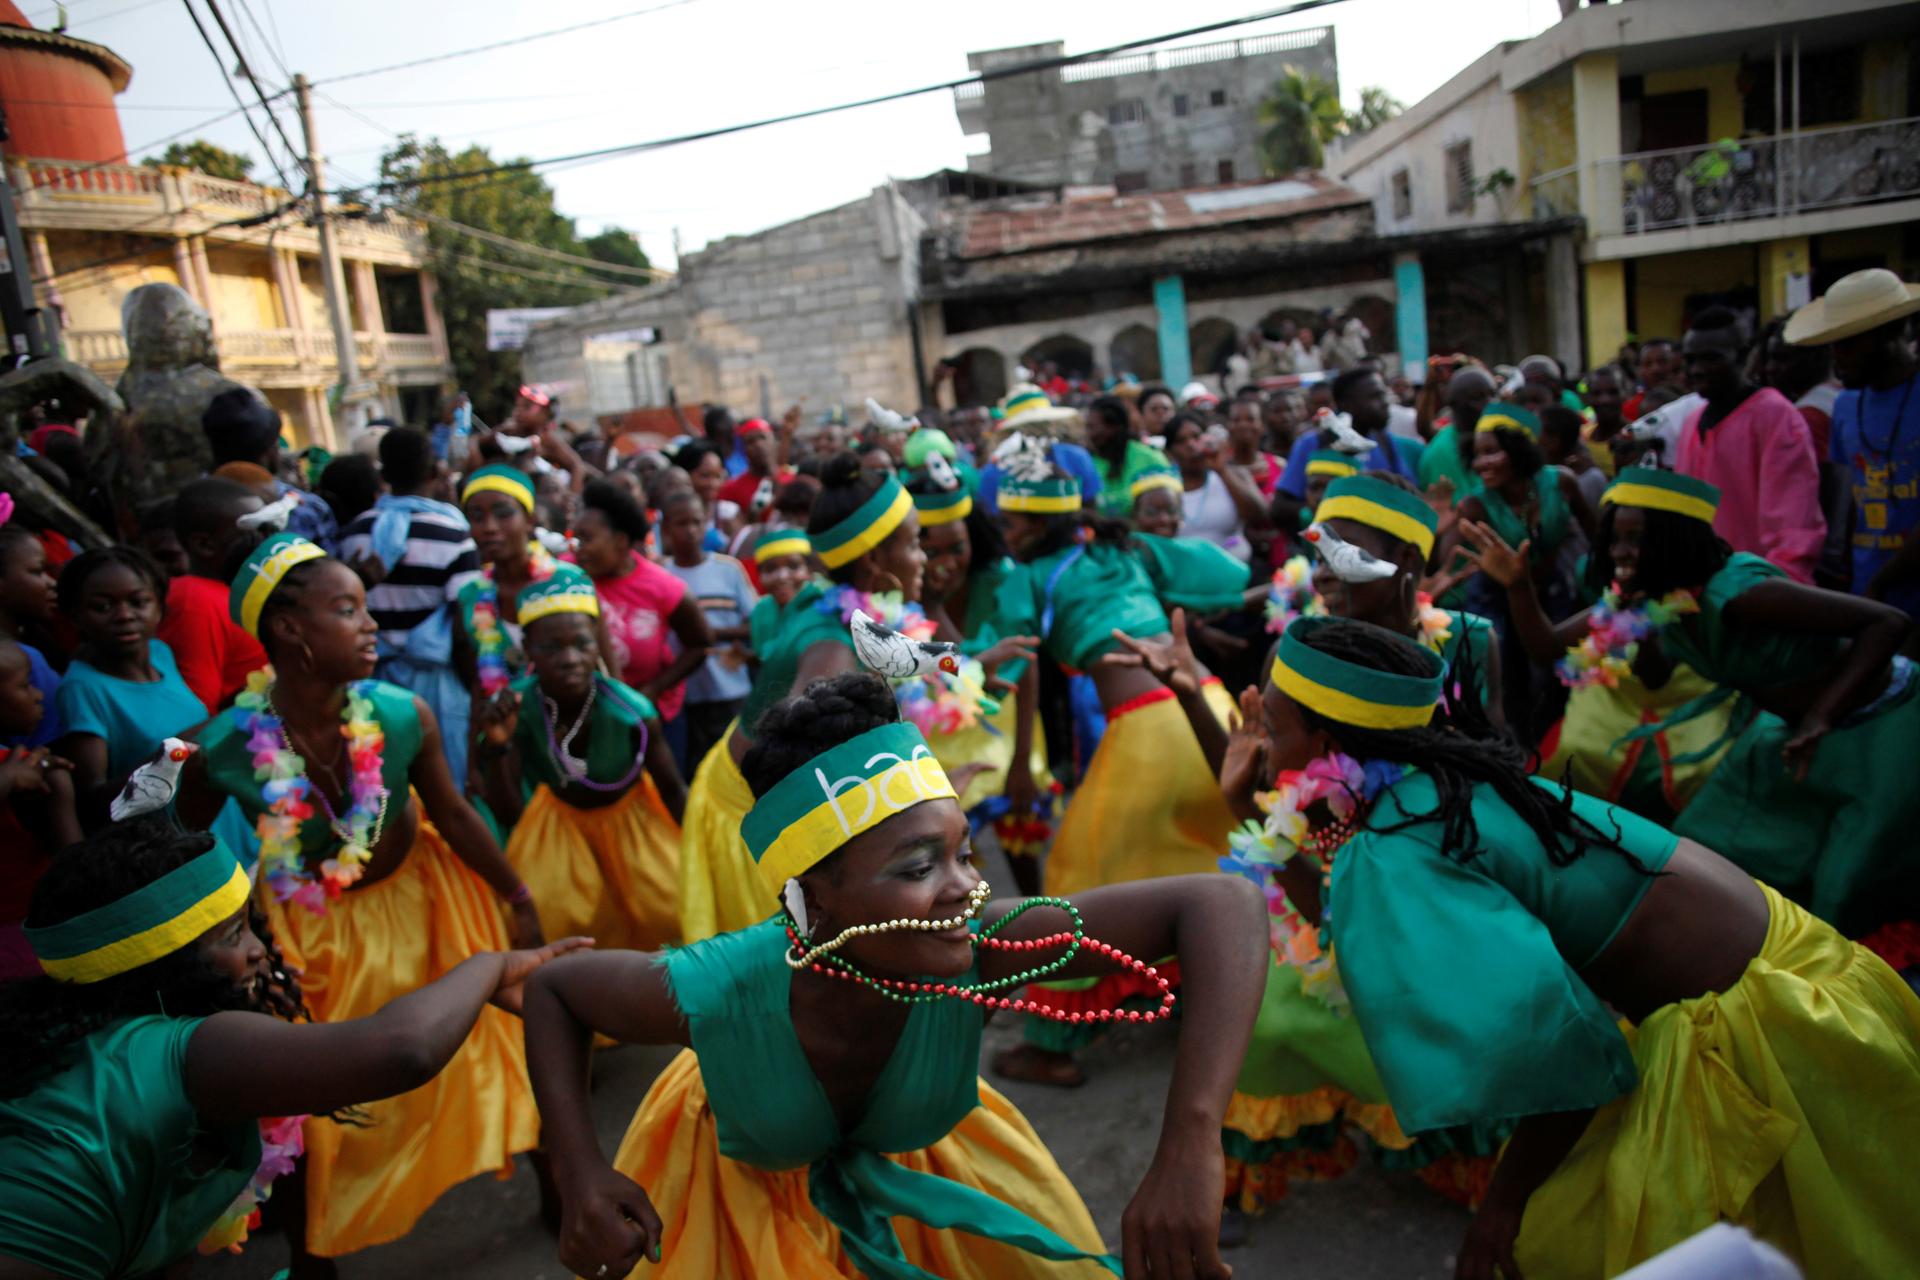 Women in green and yellow costumes dance